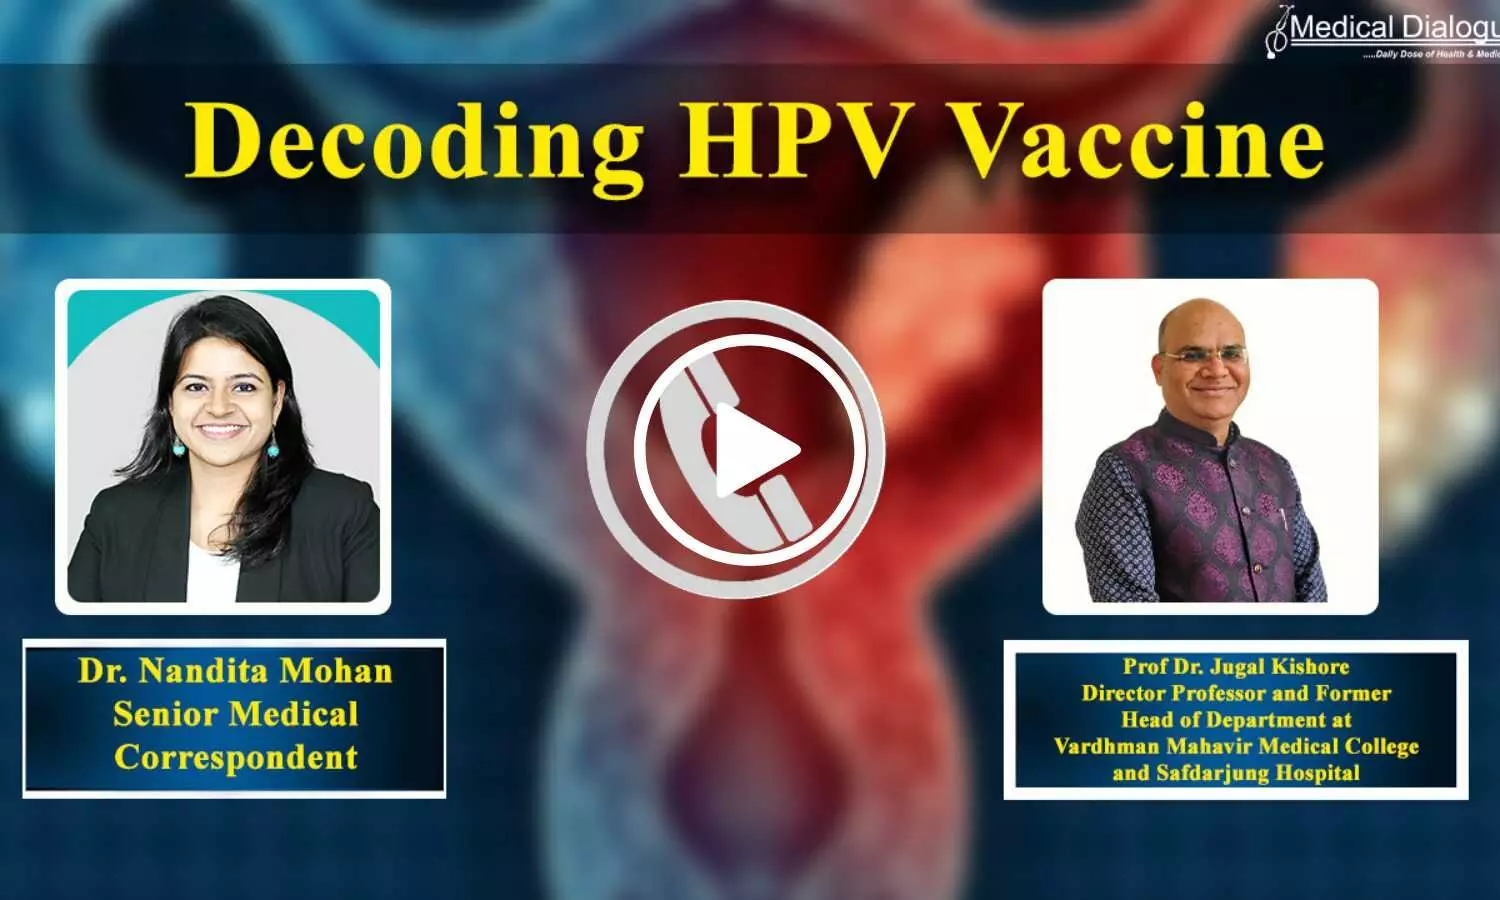 HPV vaccines not just for females, it is useful for males too! Prof Dr Juggal Kishore explains